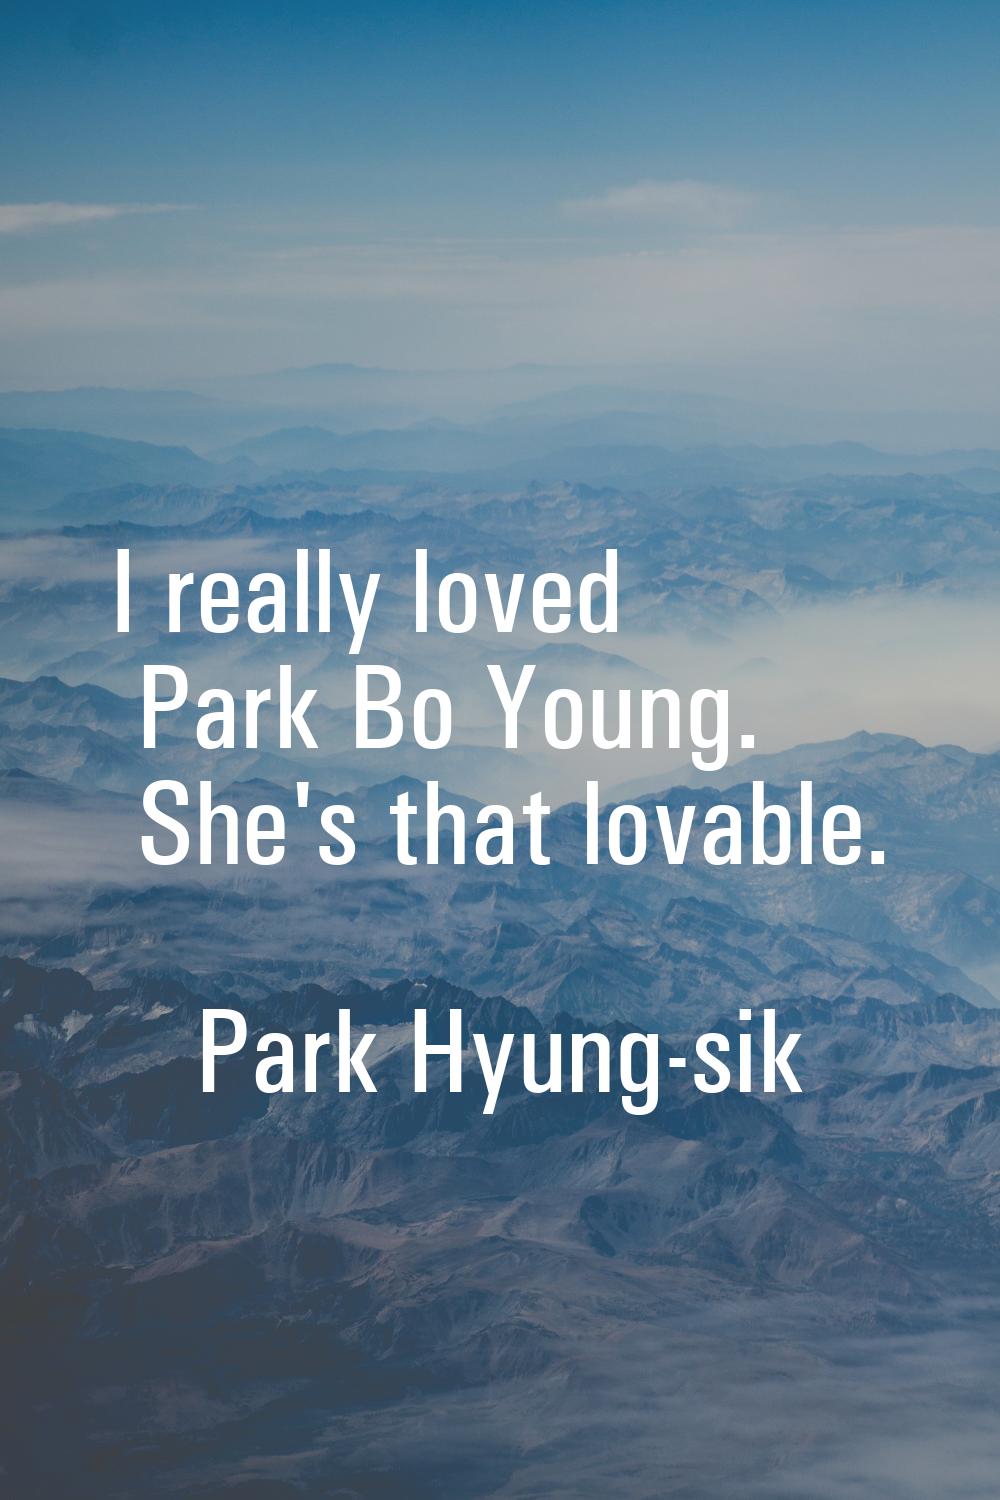 I really loved Park Bo Young. She's that lovable.